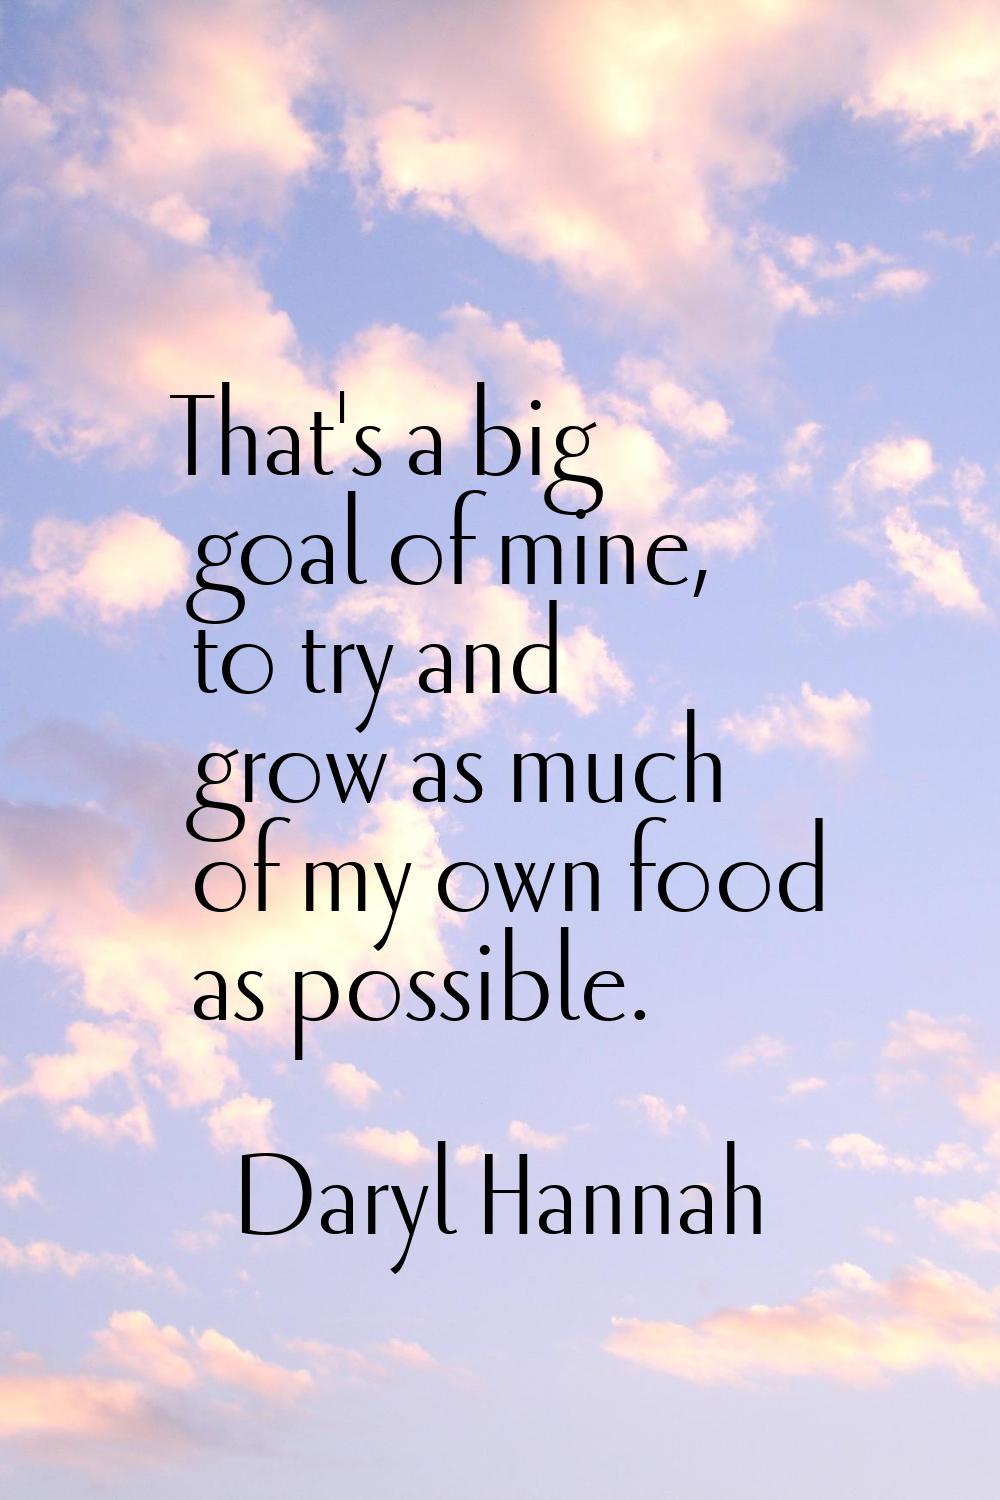 That's a big goal of mine, to try and grow as much of my own food as possible.